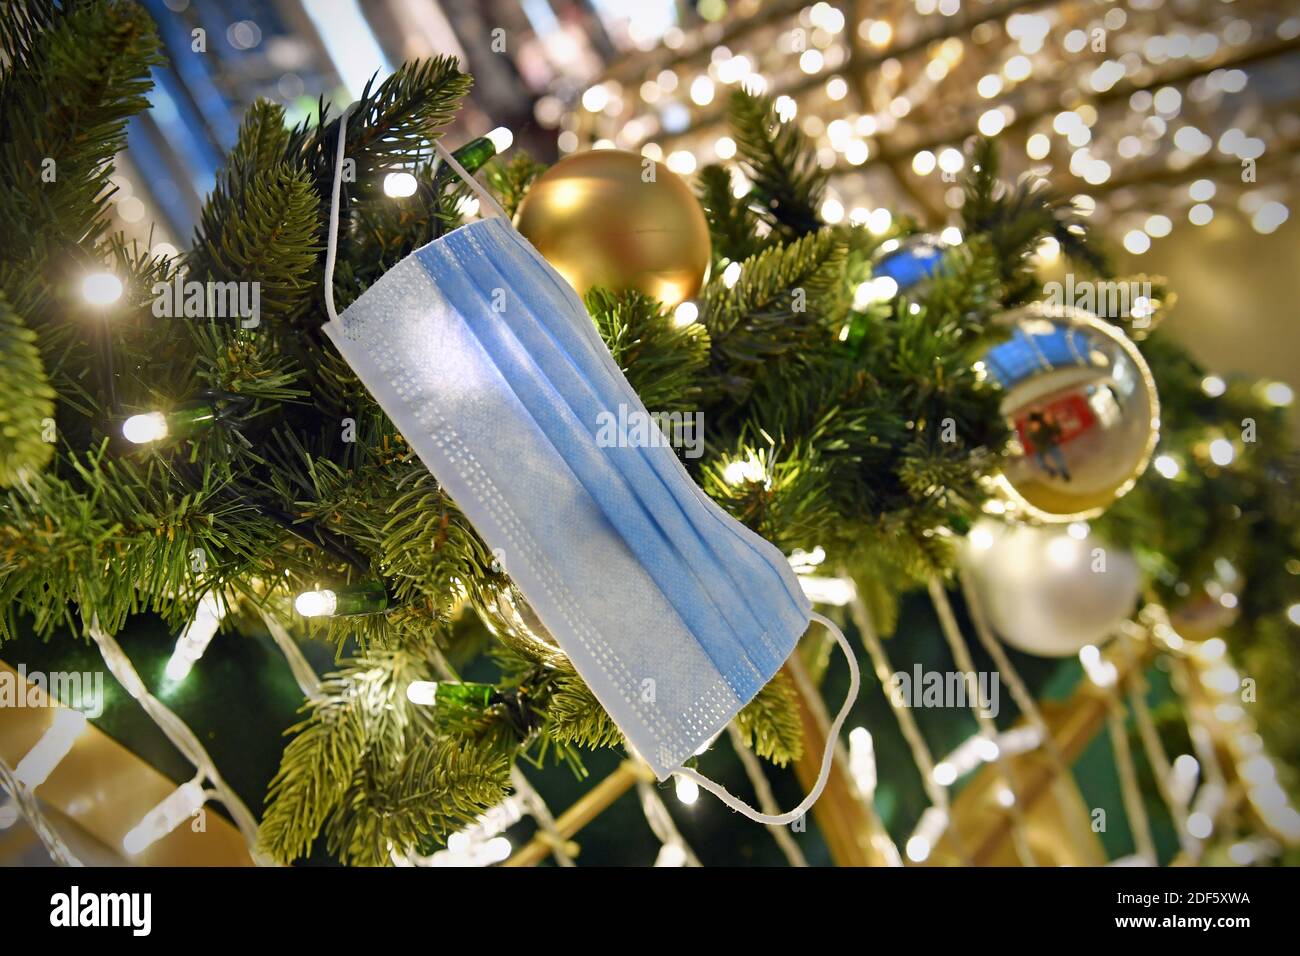 Prisoners in times of the coronavirus pandemic. Weihaftertlich decorated Riem arcades, Riem Arcades in Munich on December 2nd, 2020. A face mask, mask hangs on a Weihaftertsbaum, Christmas tree, Christmas tree decorations, pandemic, lockdown, shutdown, incidence value. | usage worldwide Stock Photo